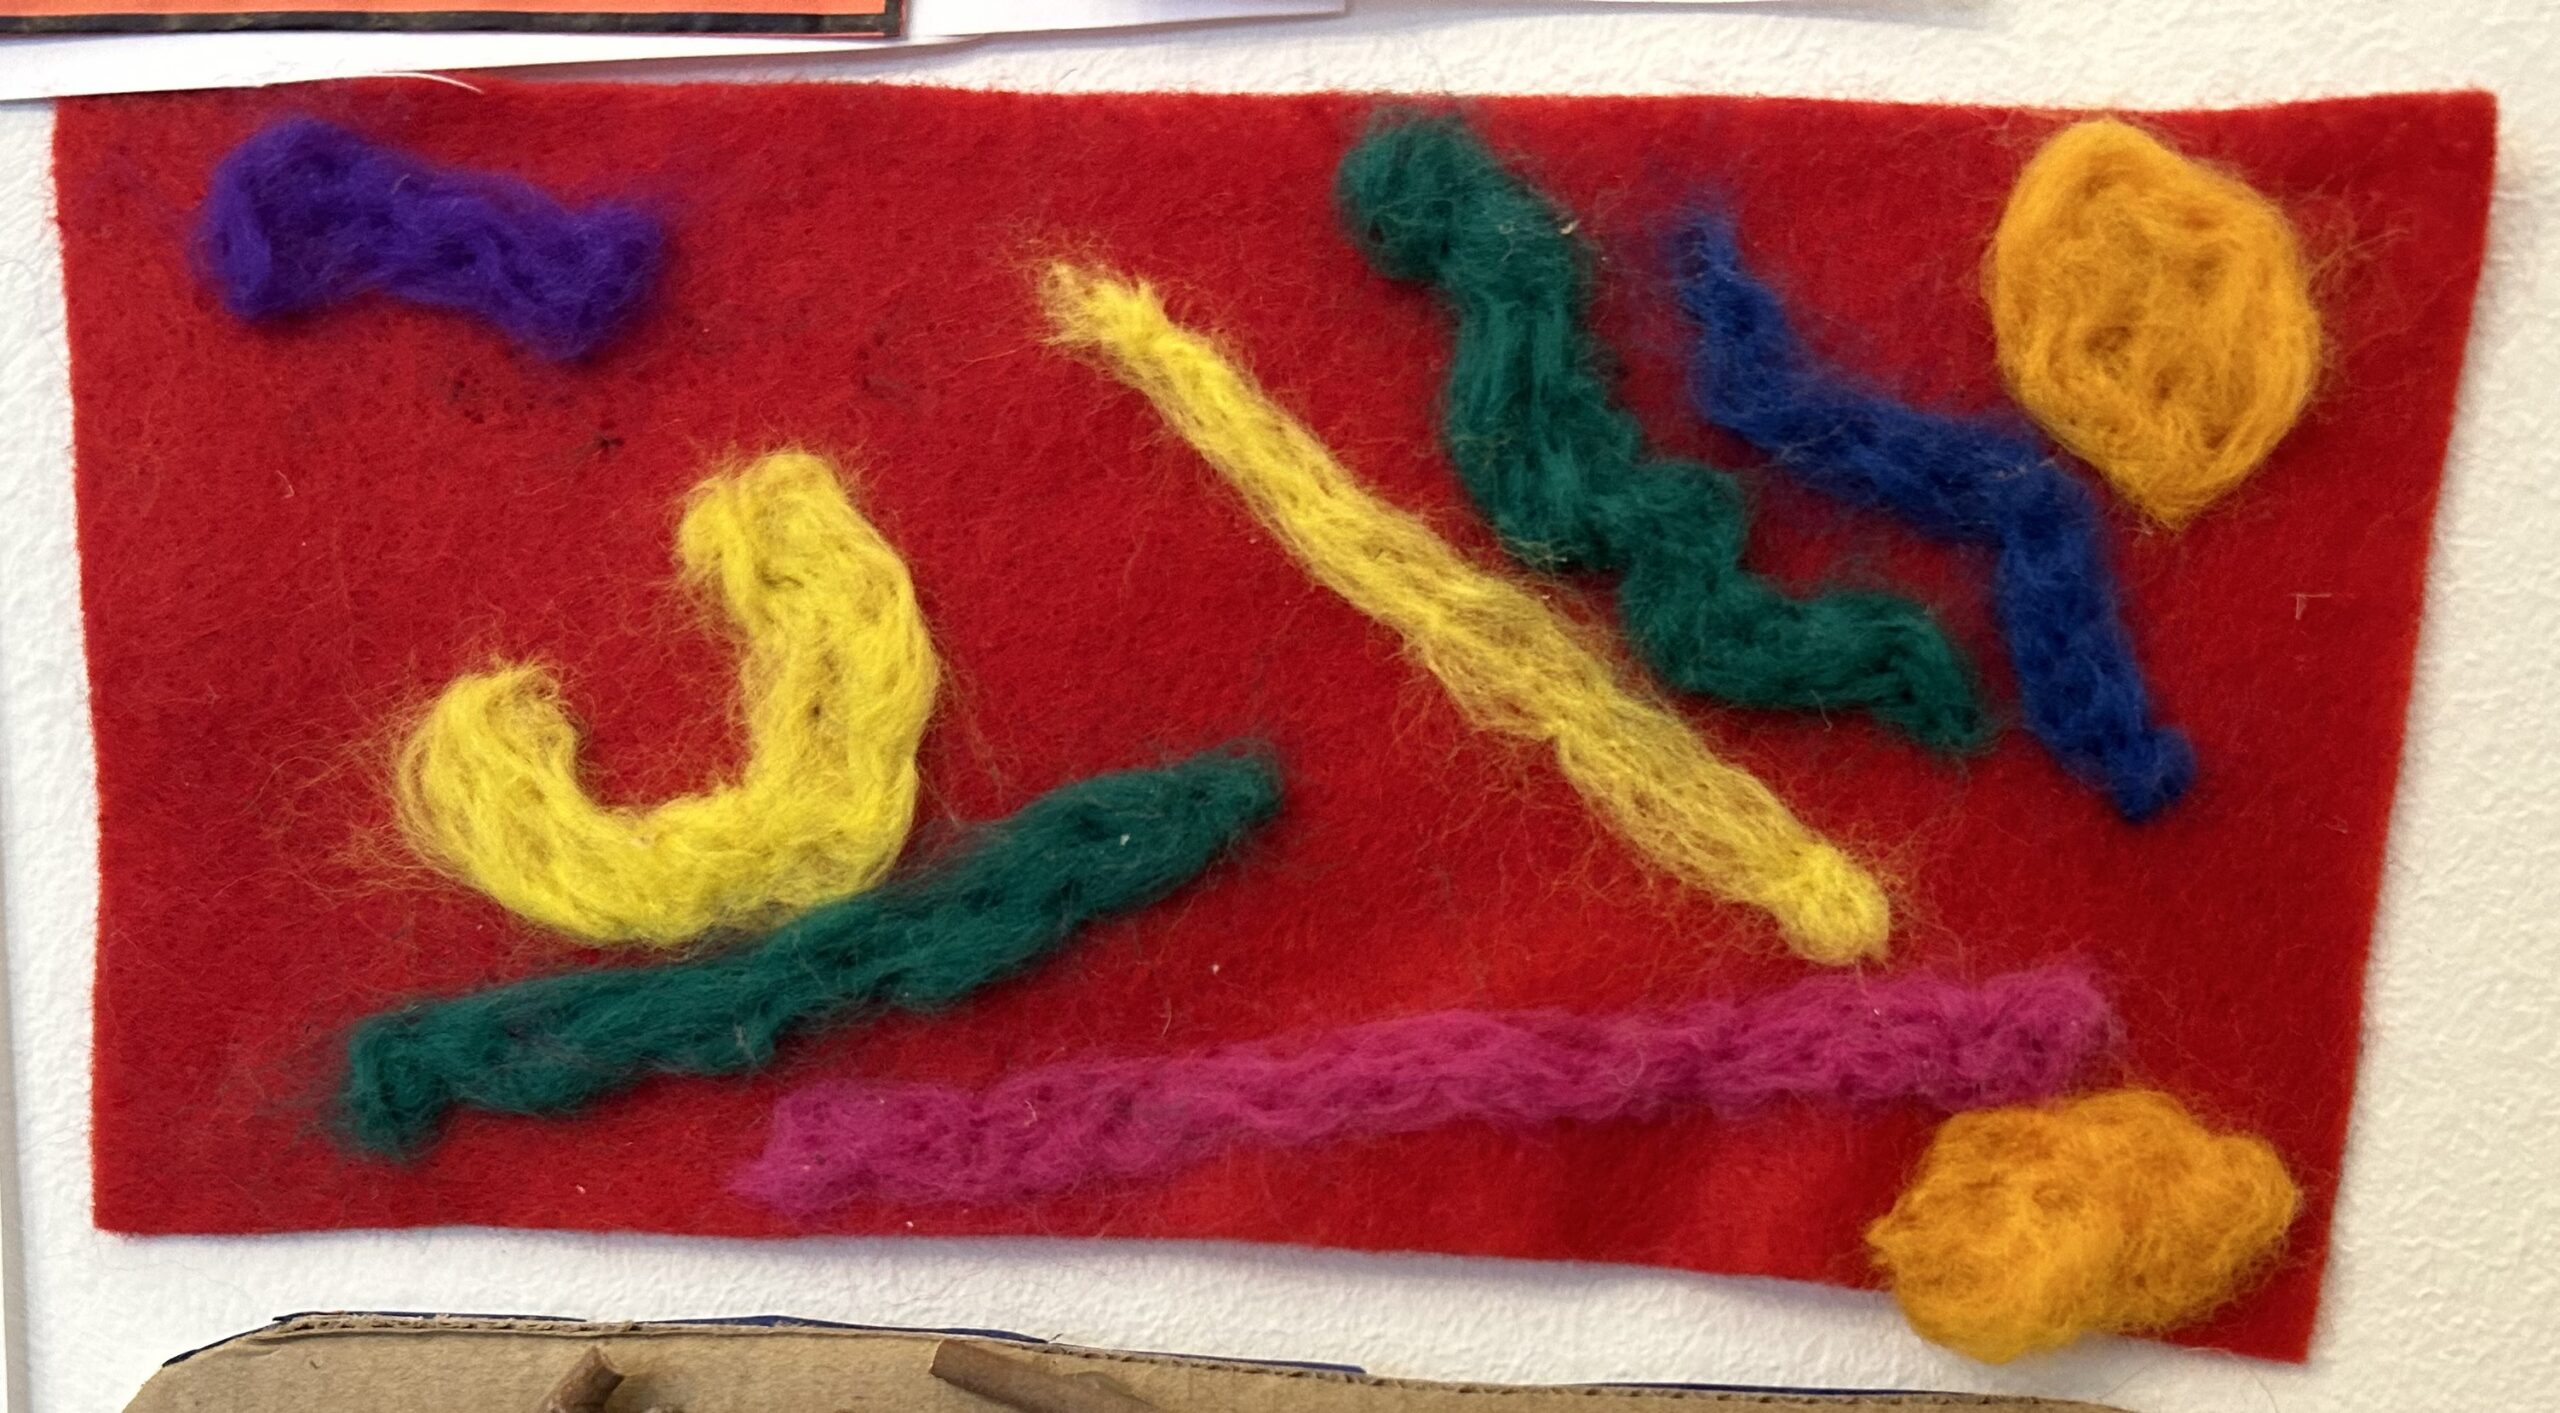 multiple felt scraps of green, yellow, blue and pink or a red felt background, made by a child